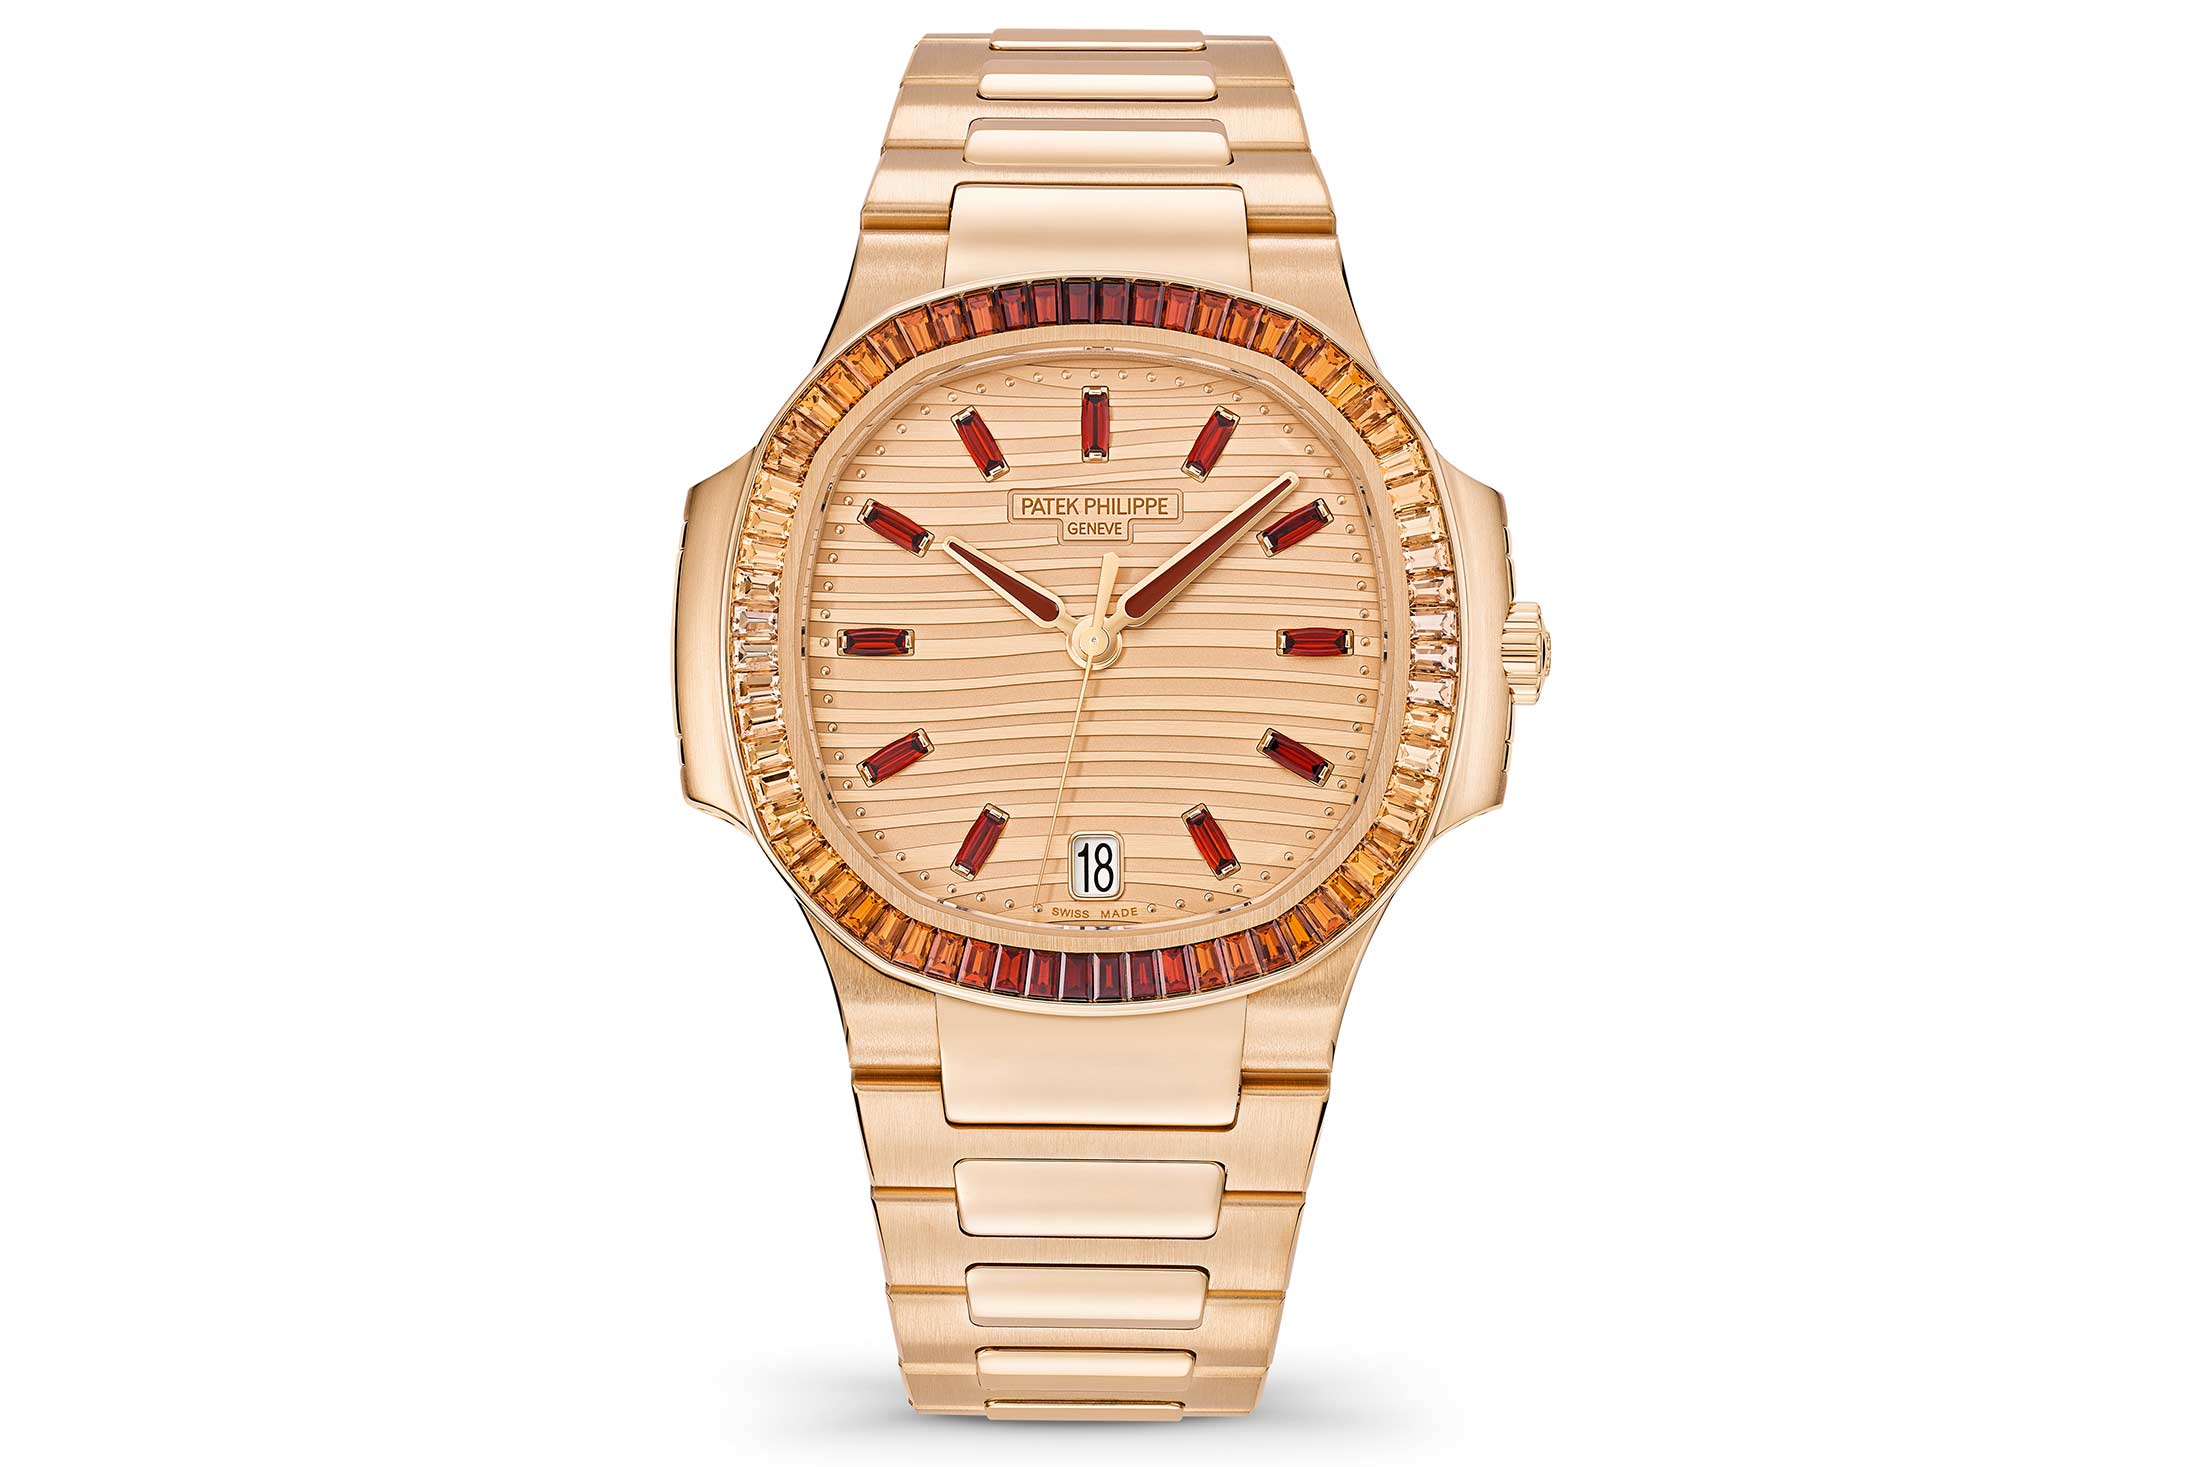 Patek Philippe Nautilus Travel Time in 18k rose gold and a deep b